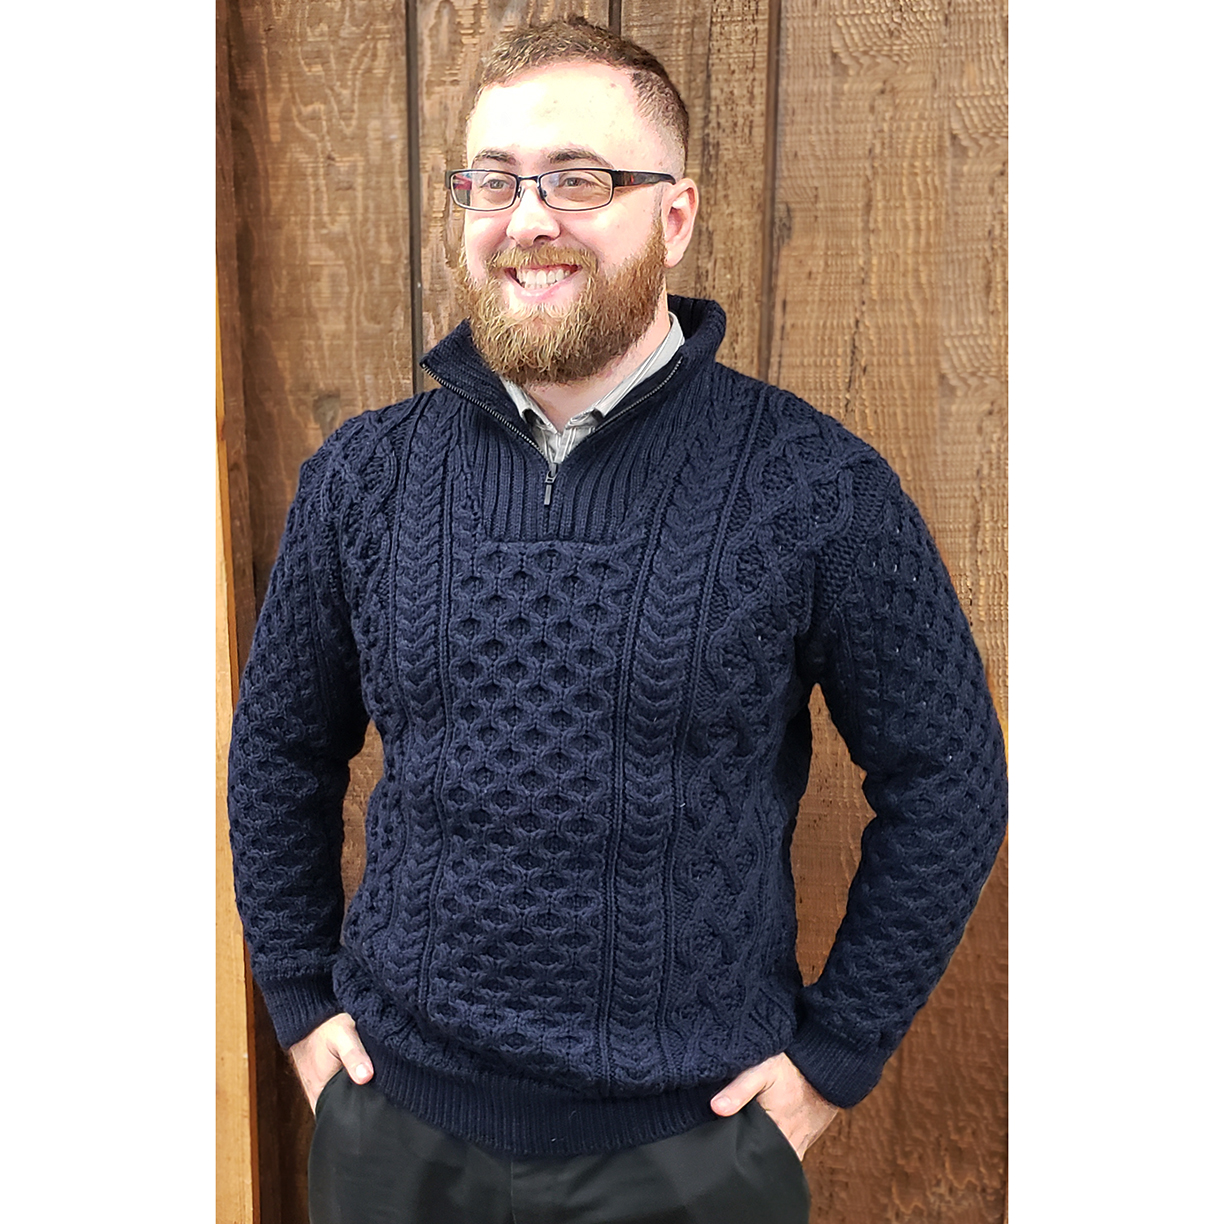 Dromore Aran Troyer Available in Navy, Sizes M - XXL. 100% Merino Wool. Made in Ireland.